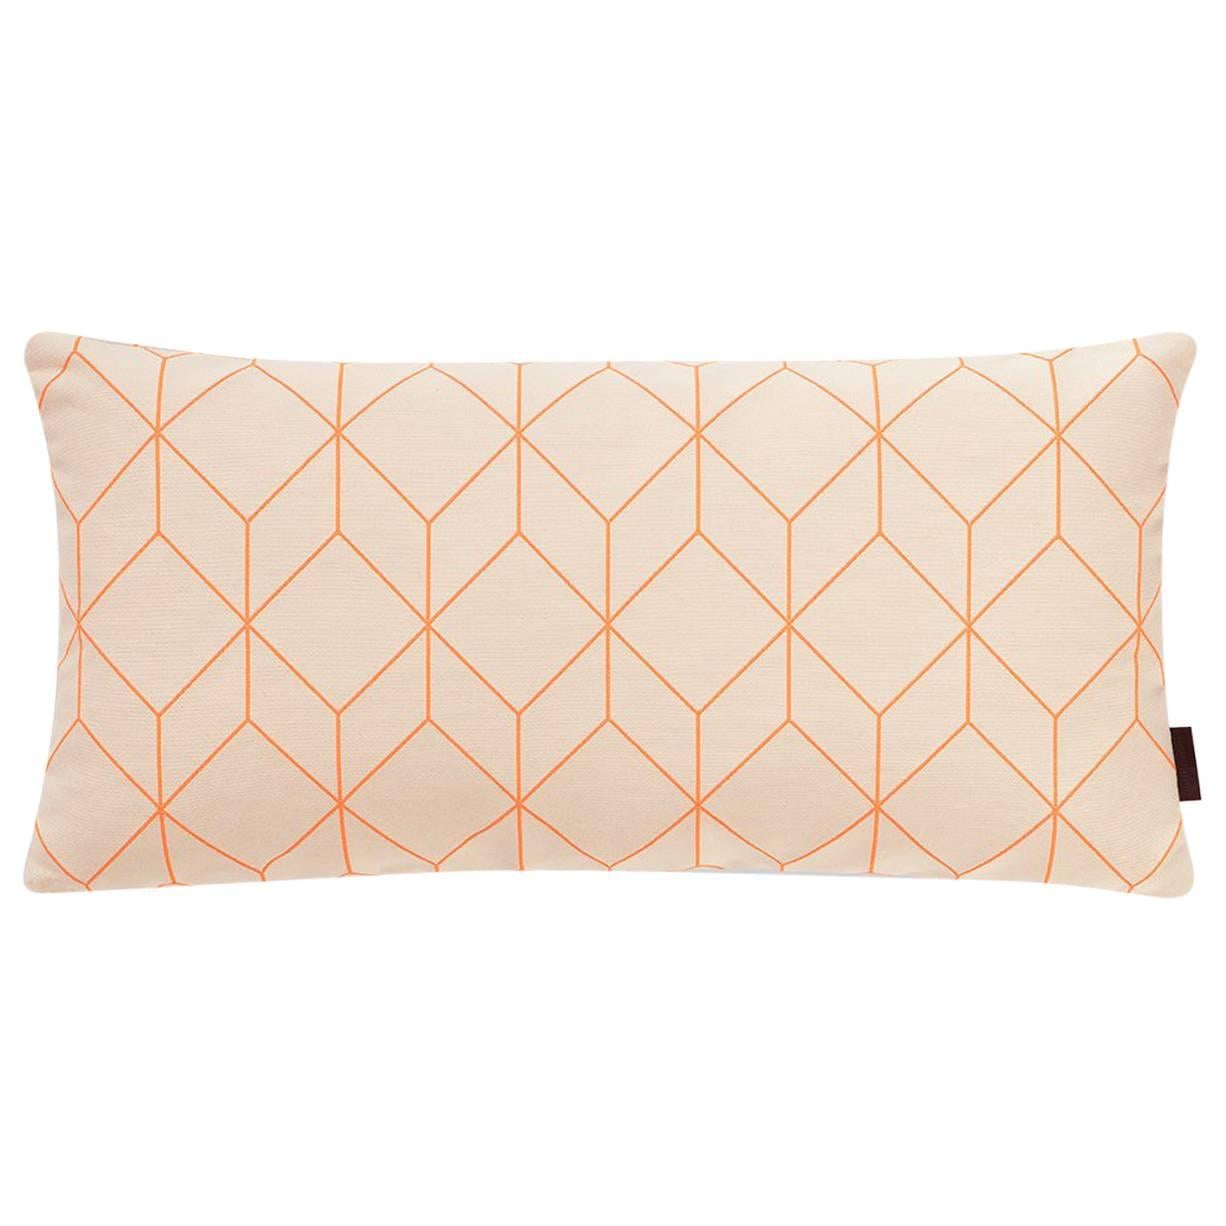 Maharam Pillow, Bright Cube by Scholten and Baijings